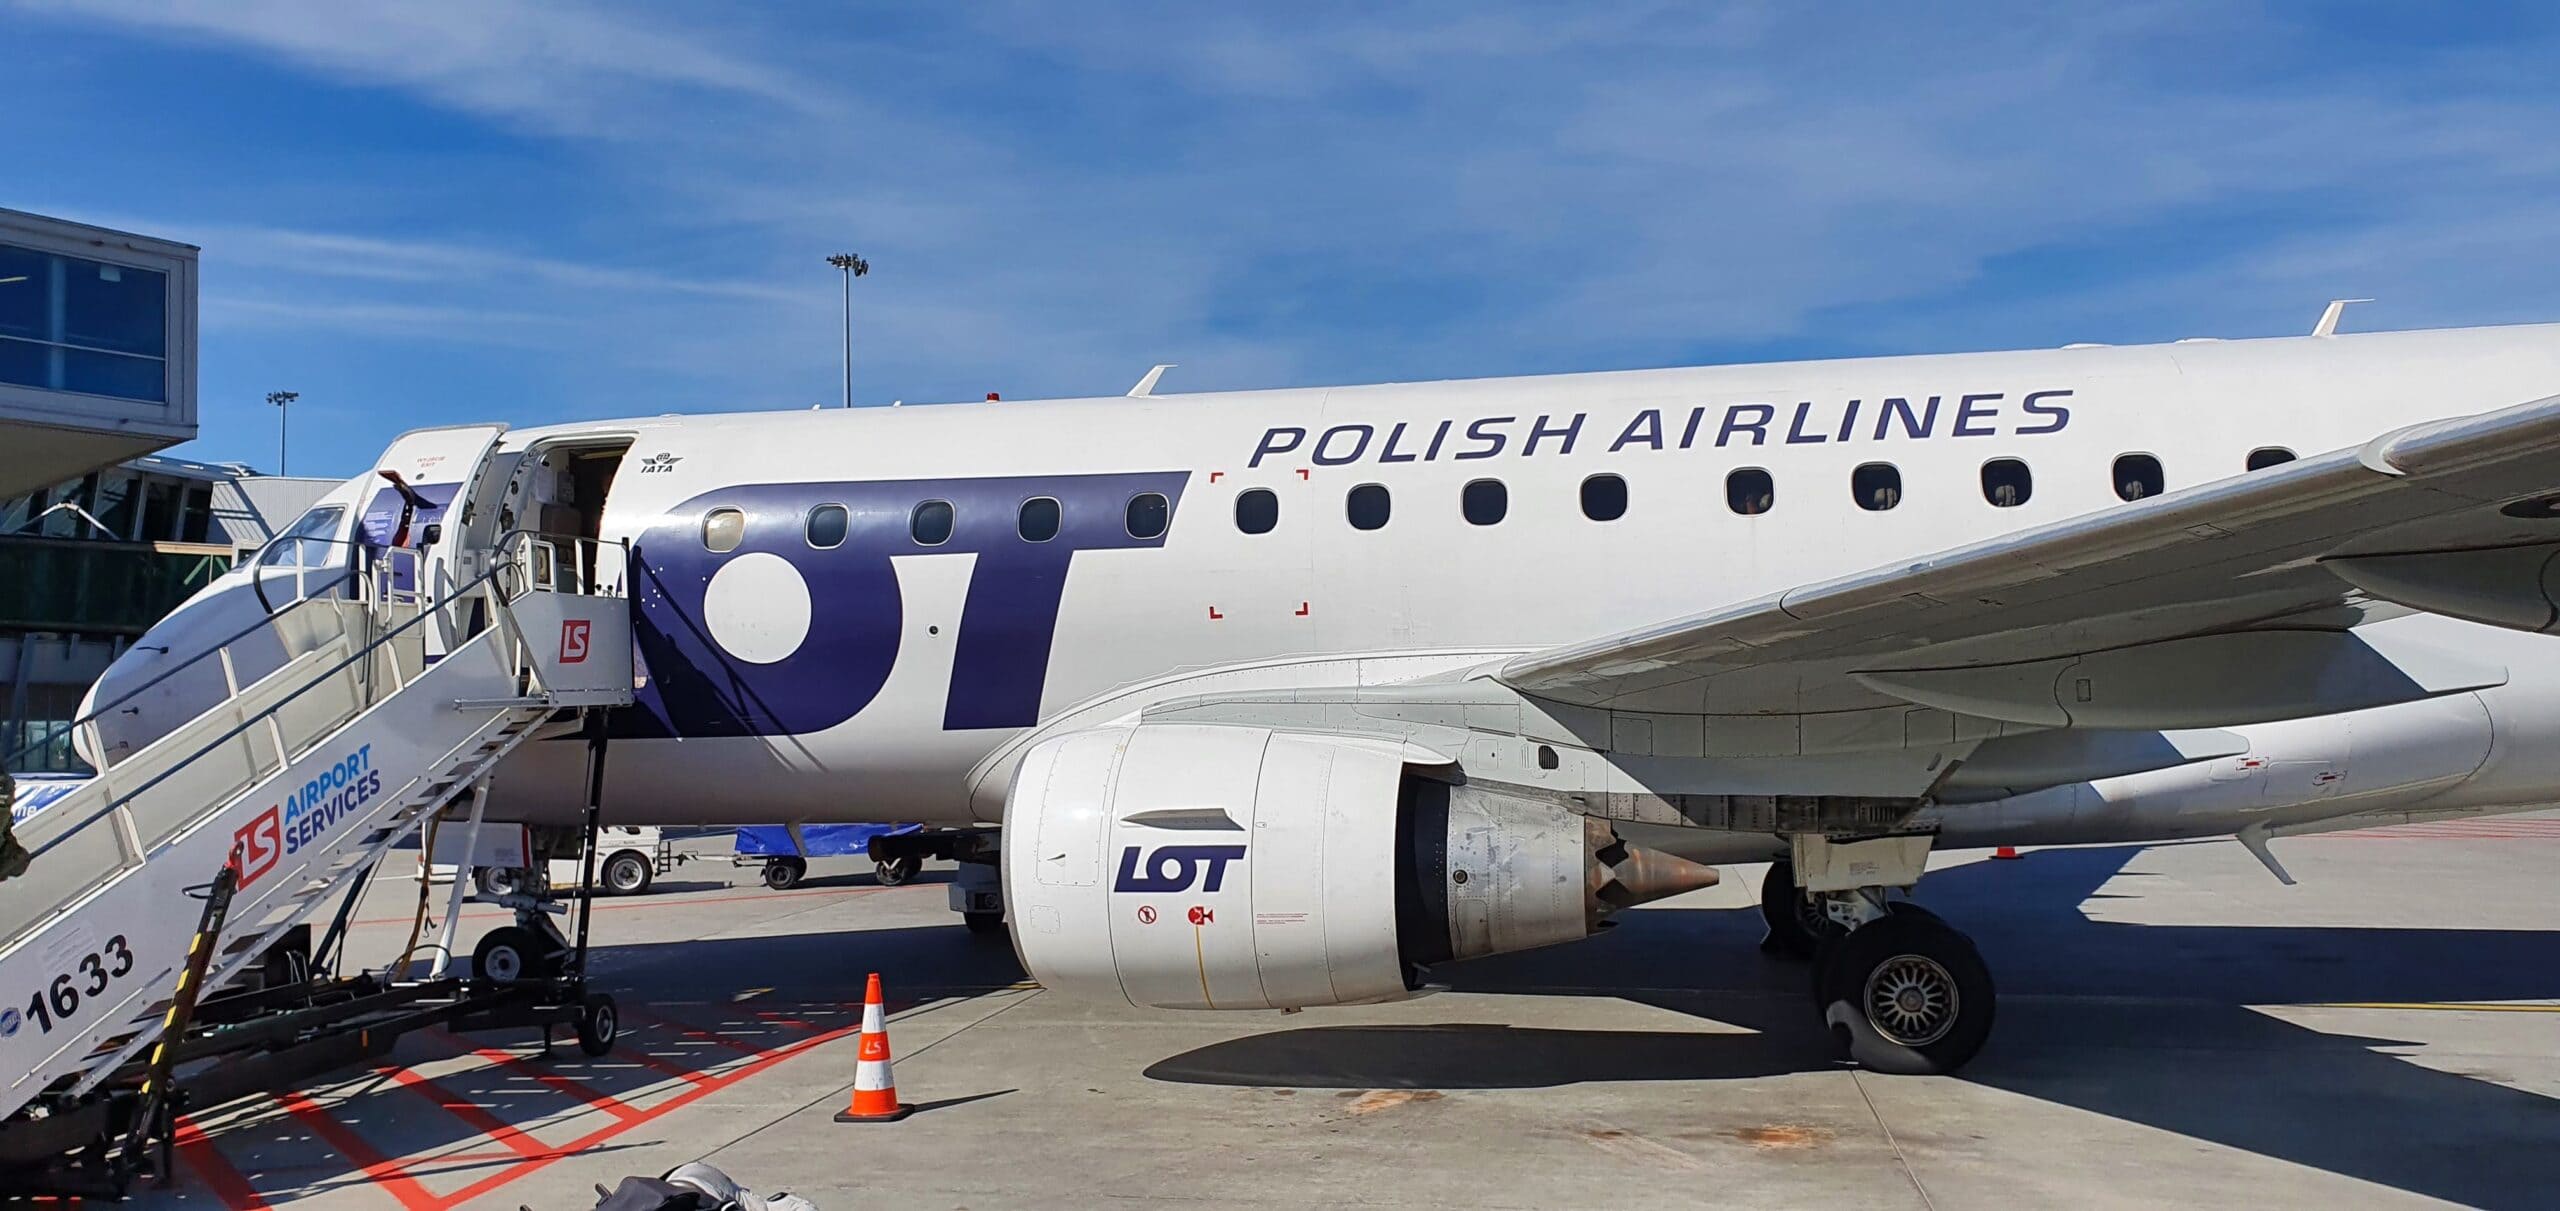 LOT Polish Airlines [LO], Partner Airlines, ANA Mileage Club